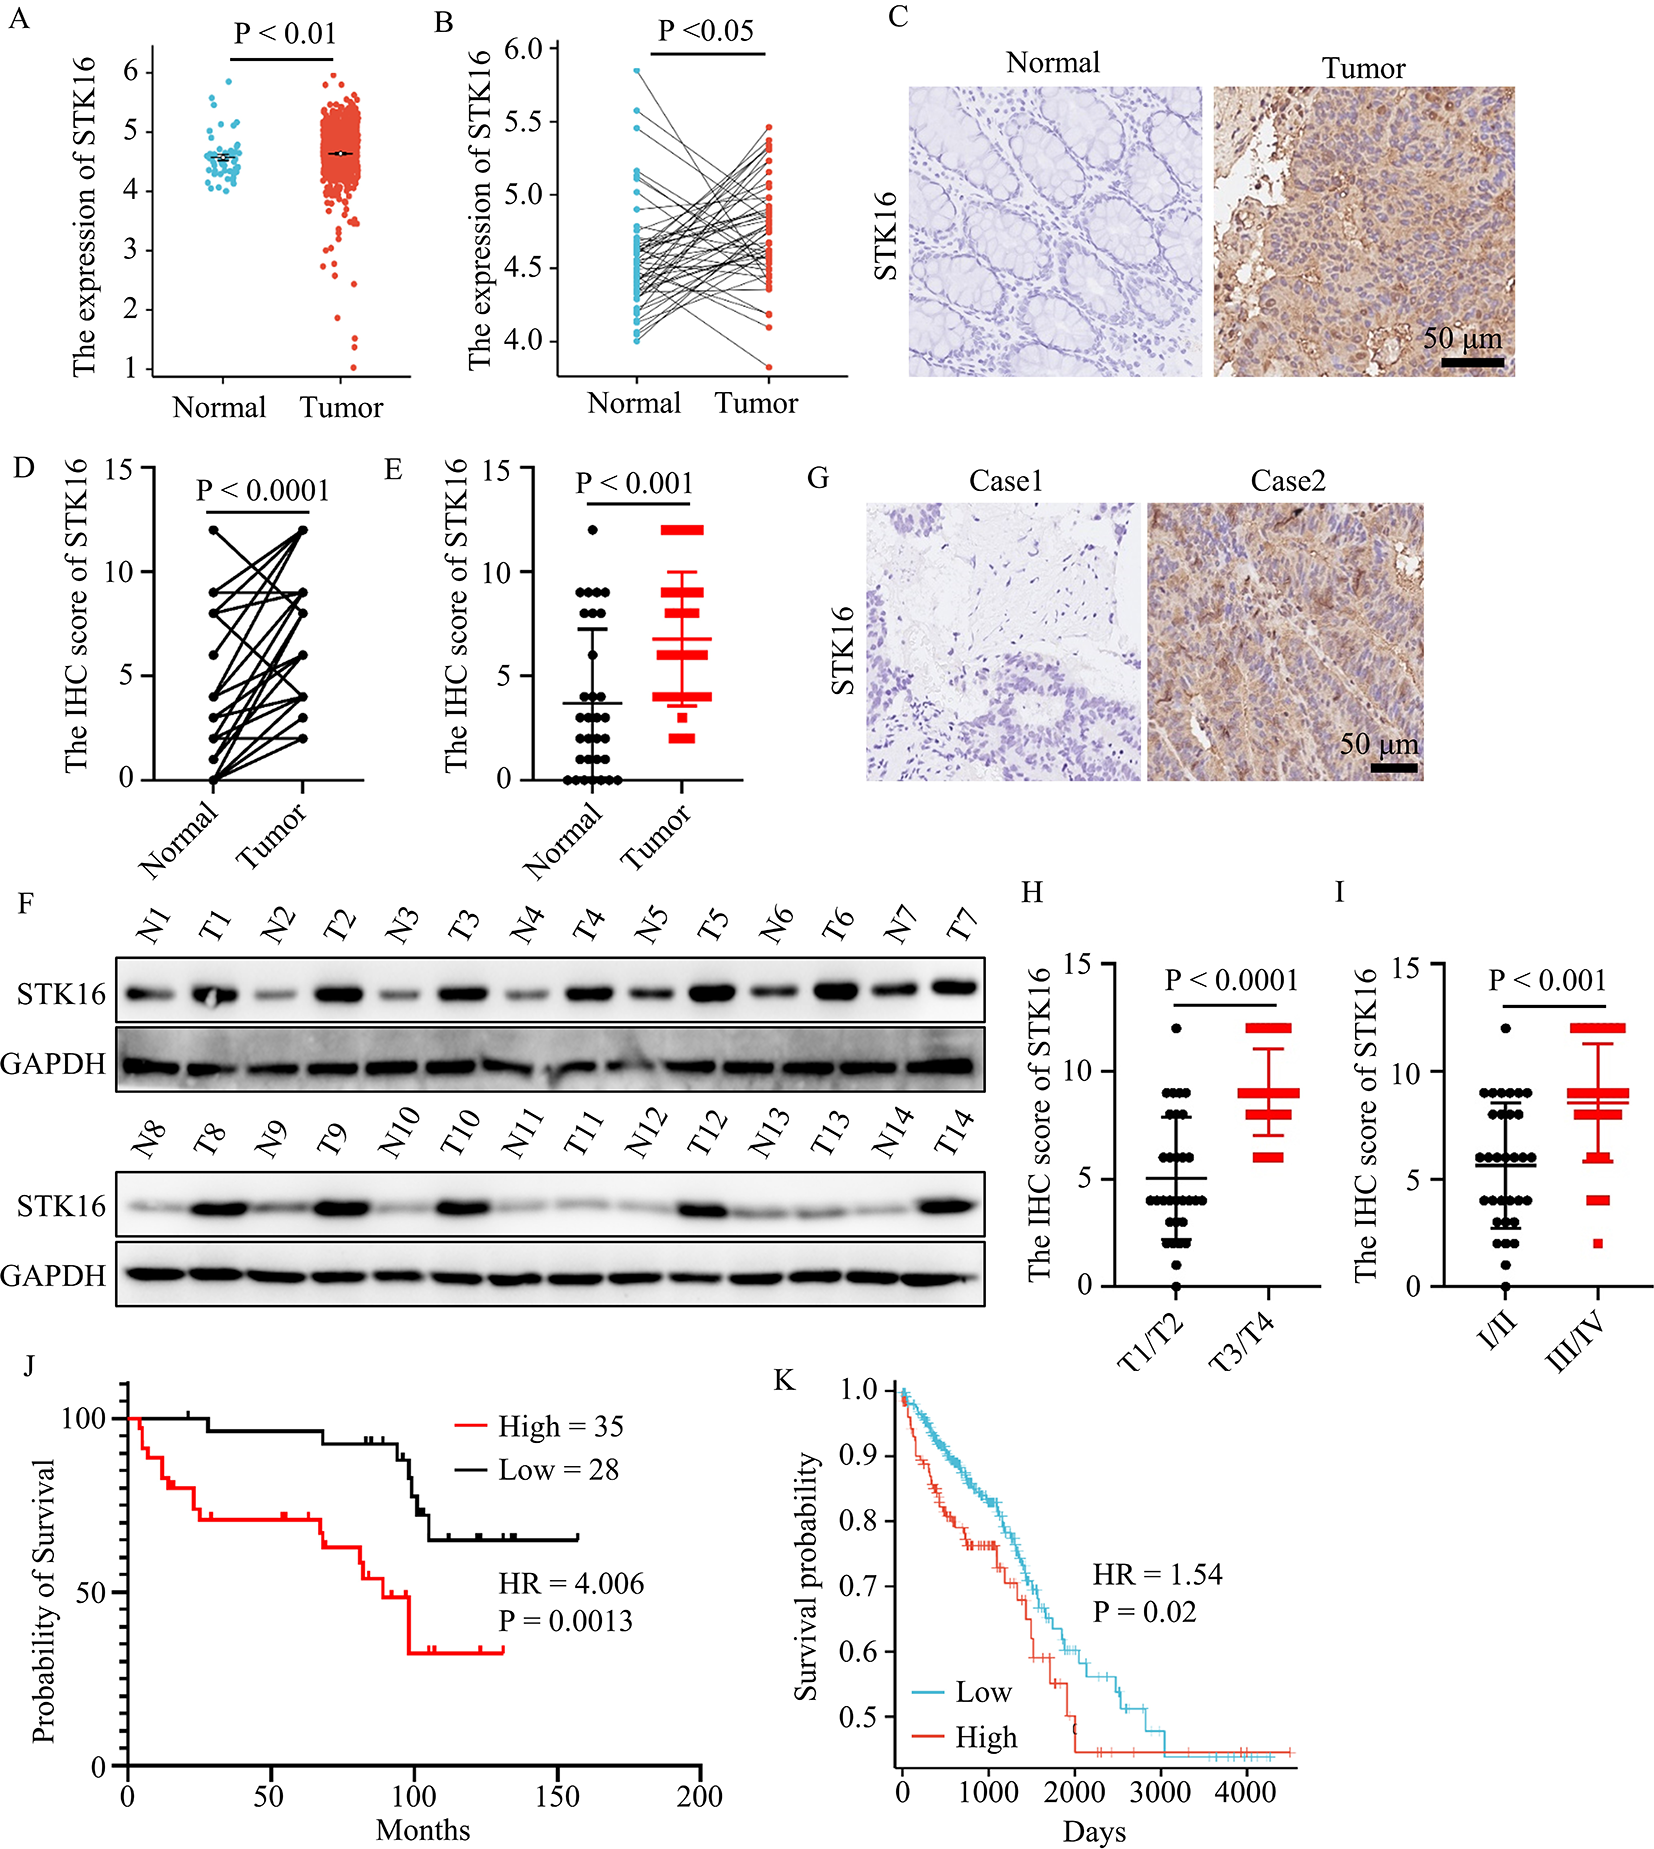 STK16 promoted colorectal cancer progress in a c-MYC signaling-dependent manner